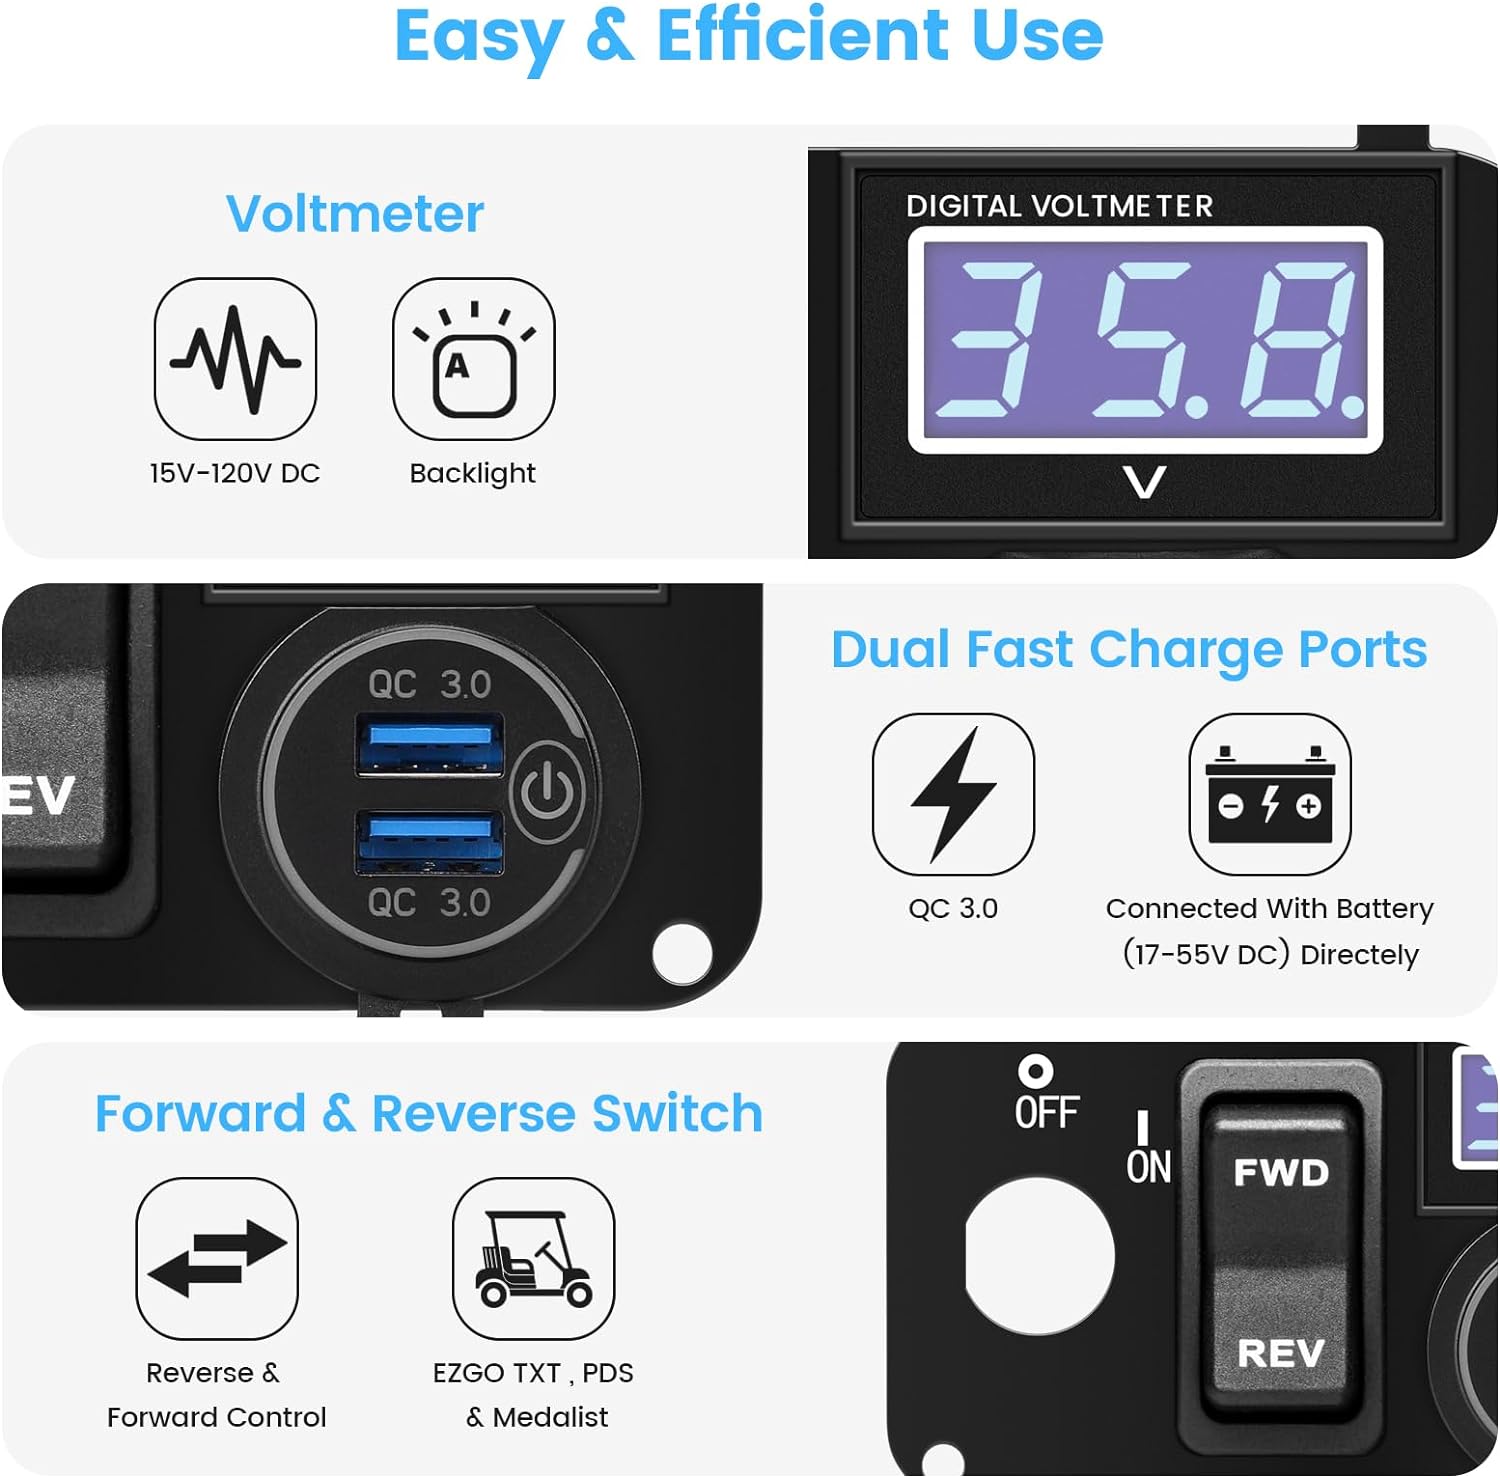 briidea 3 in 1 Multifunctional Integrated Panel with DC 12V-90V 4.2A Dual USB Charger Sockets, LED Wide Range Voltmeter & Forward Reverse Switch, Golf Cart Accessories for EZGO TXT, PDS & Medalist